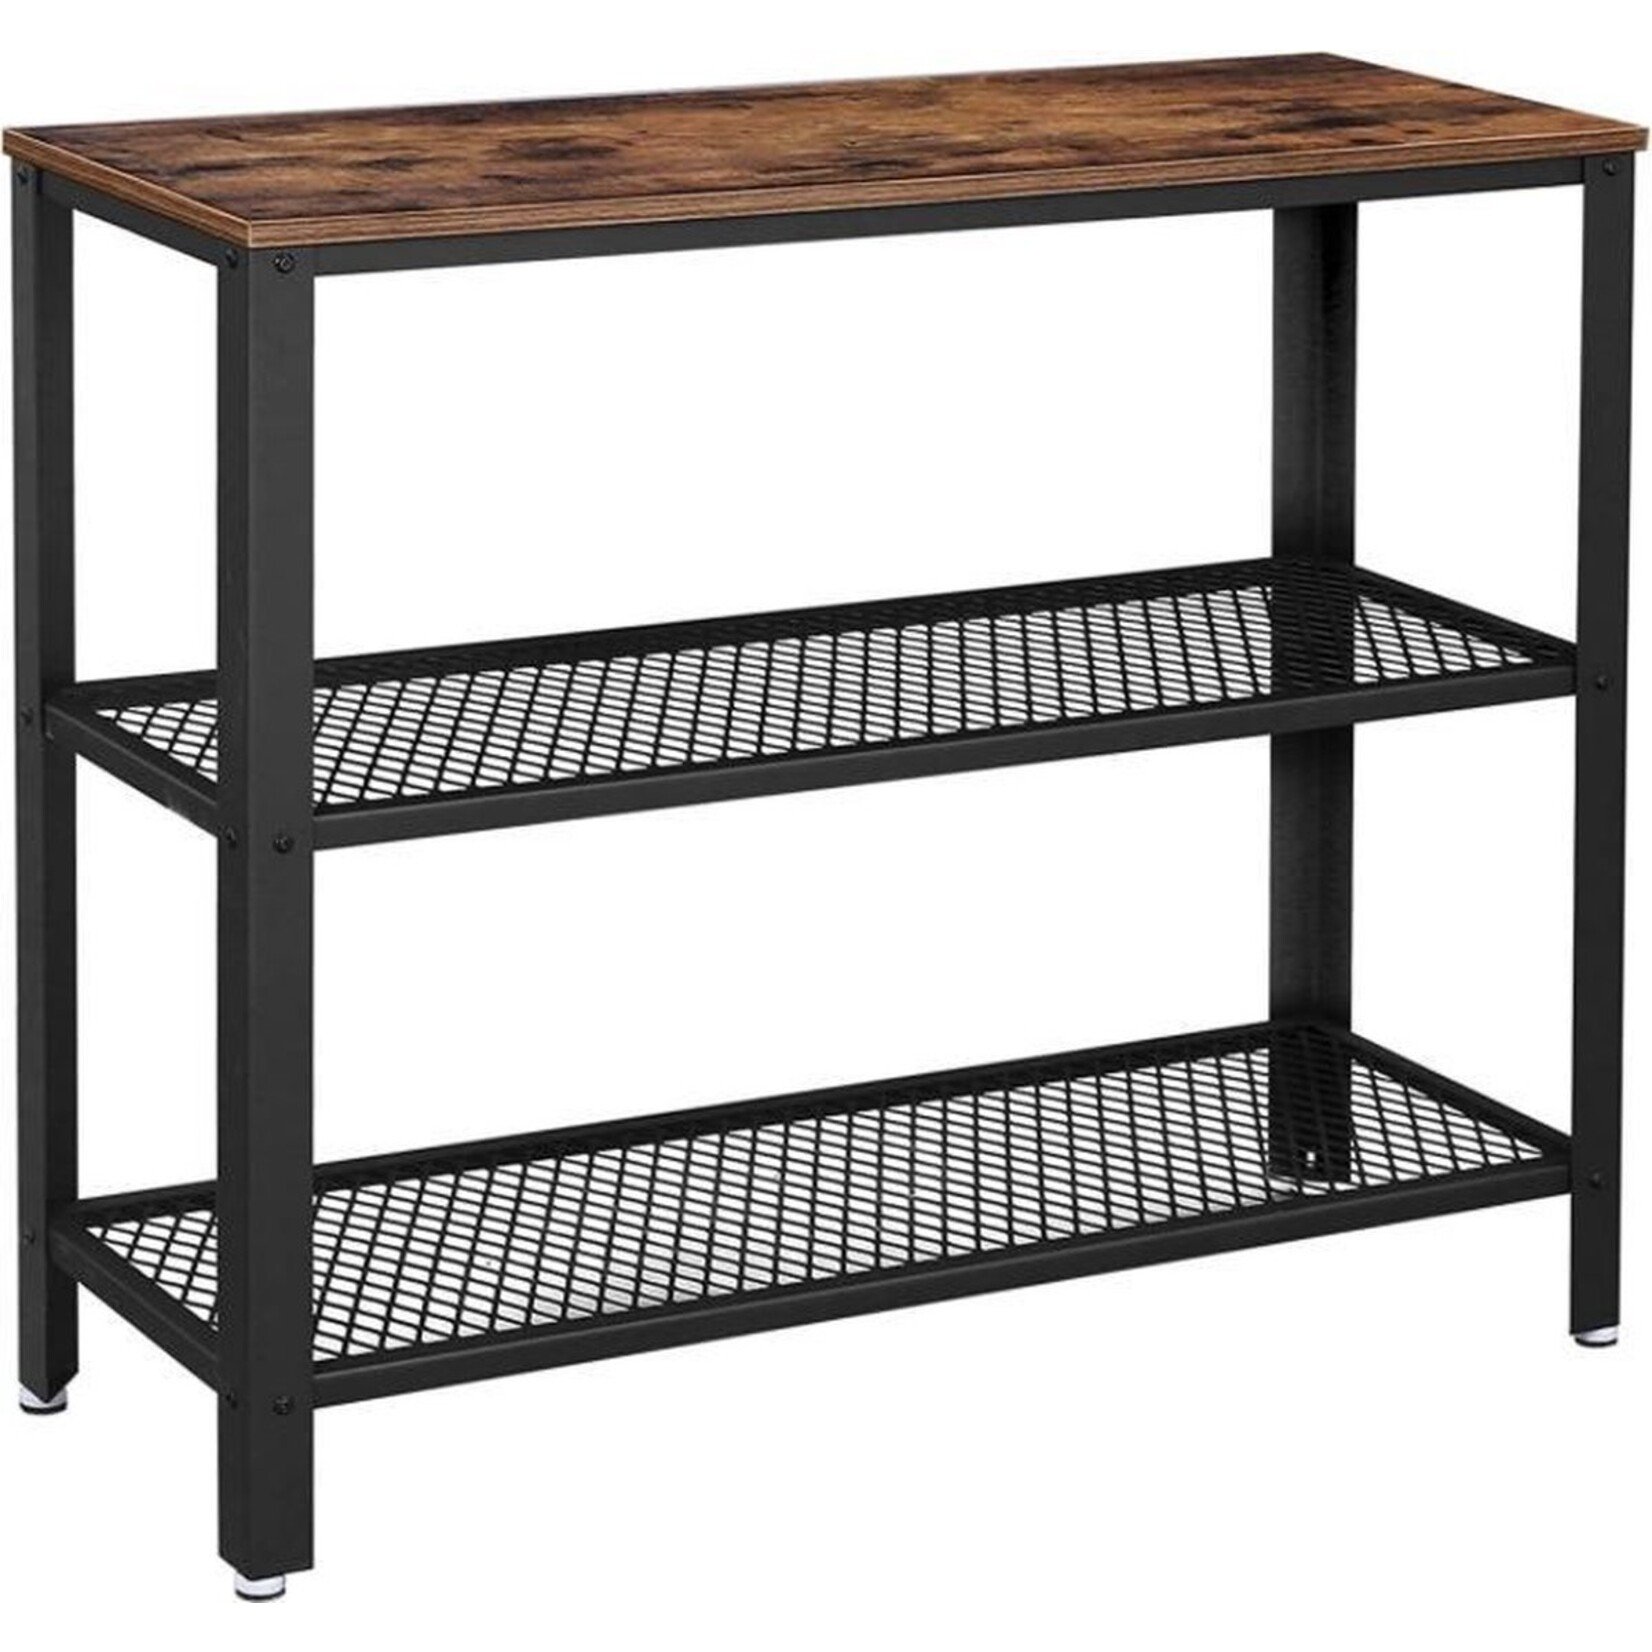 Bobbel Home Dok Home - Side table - Industrial - Wood/Metal - 101,5x35x80 cm